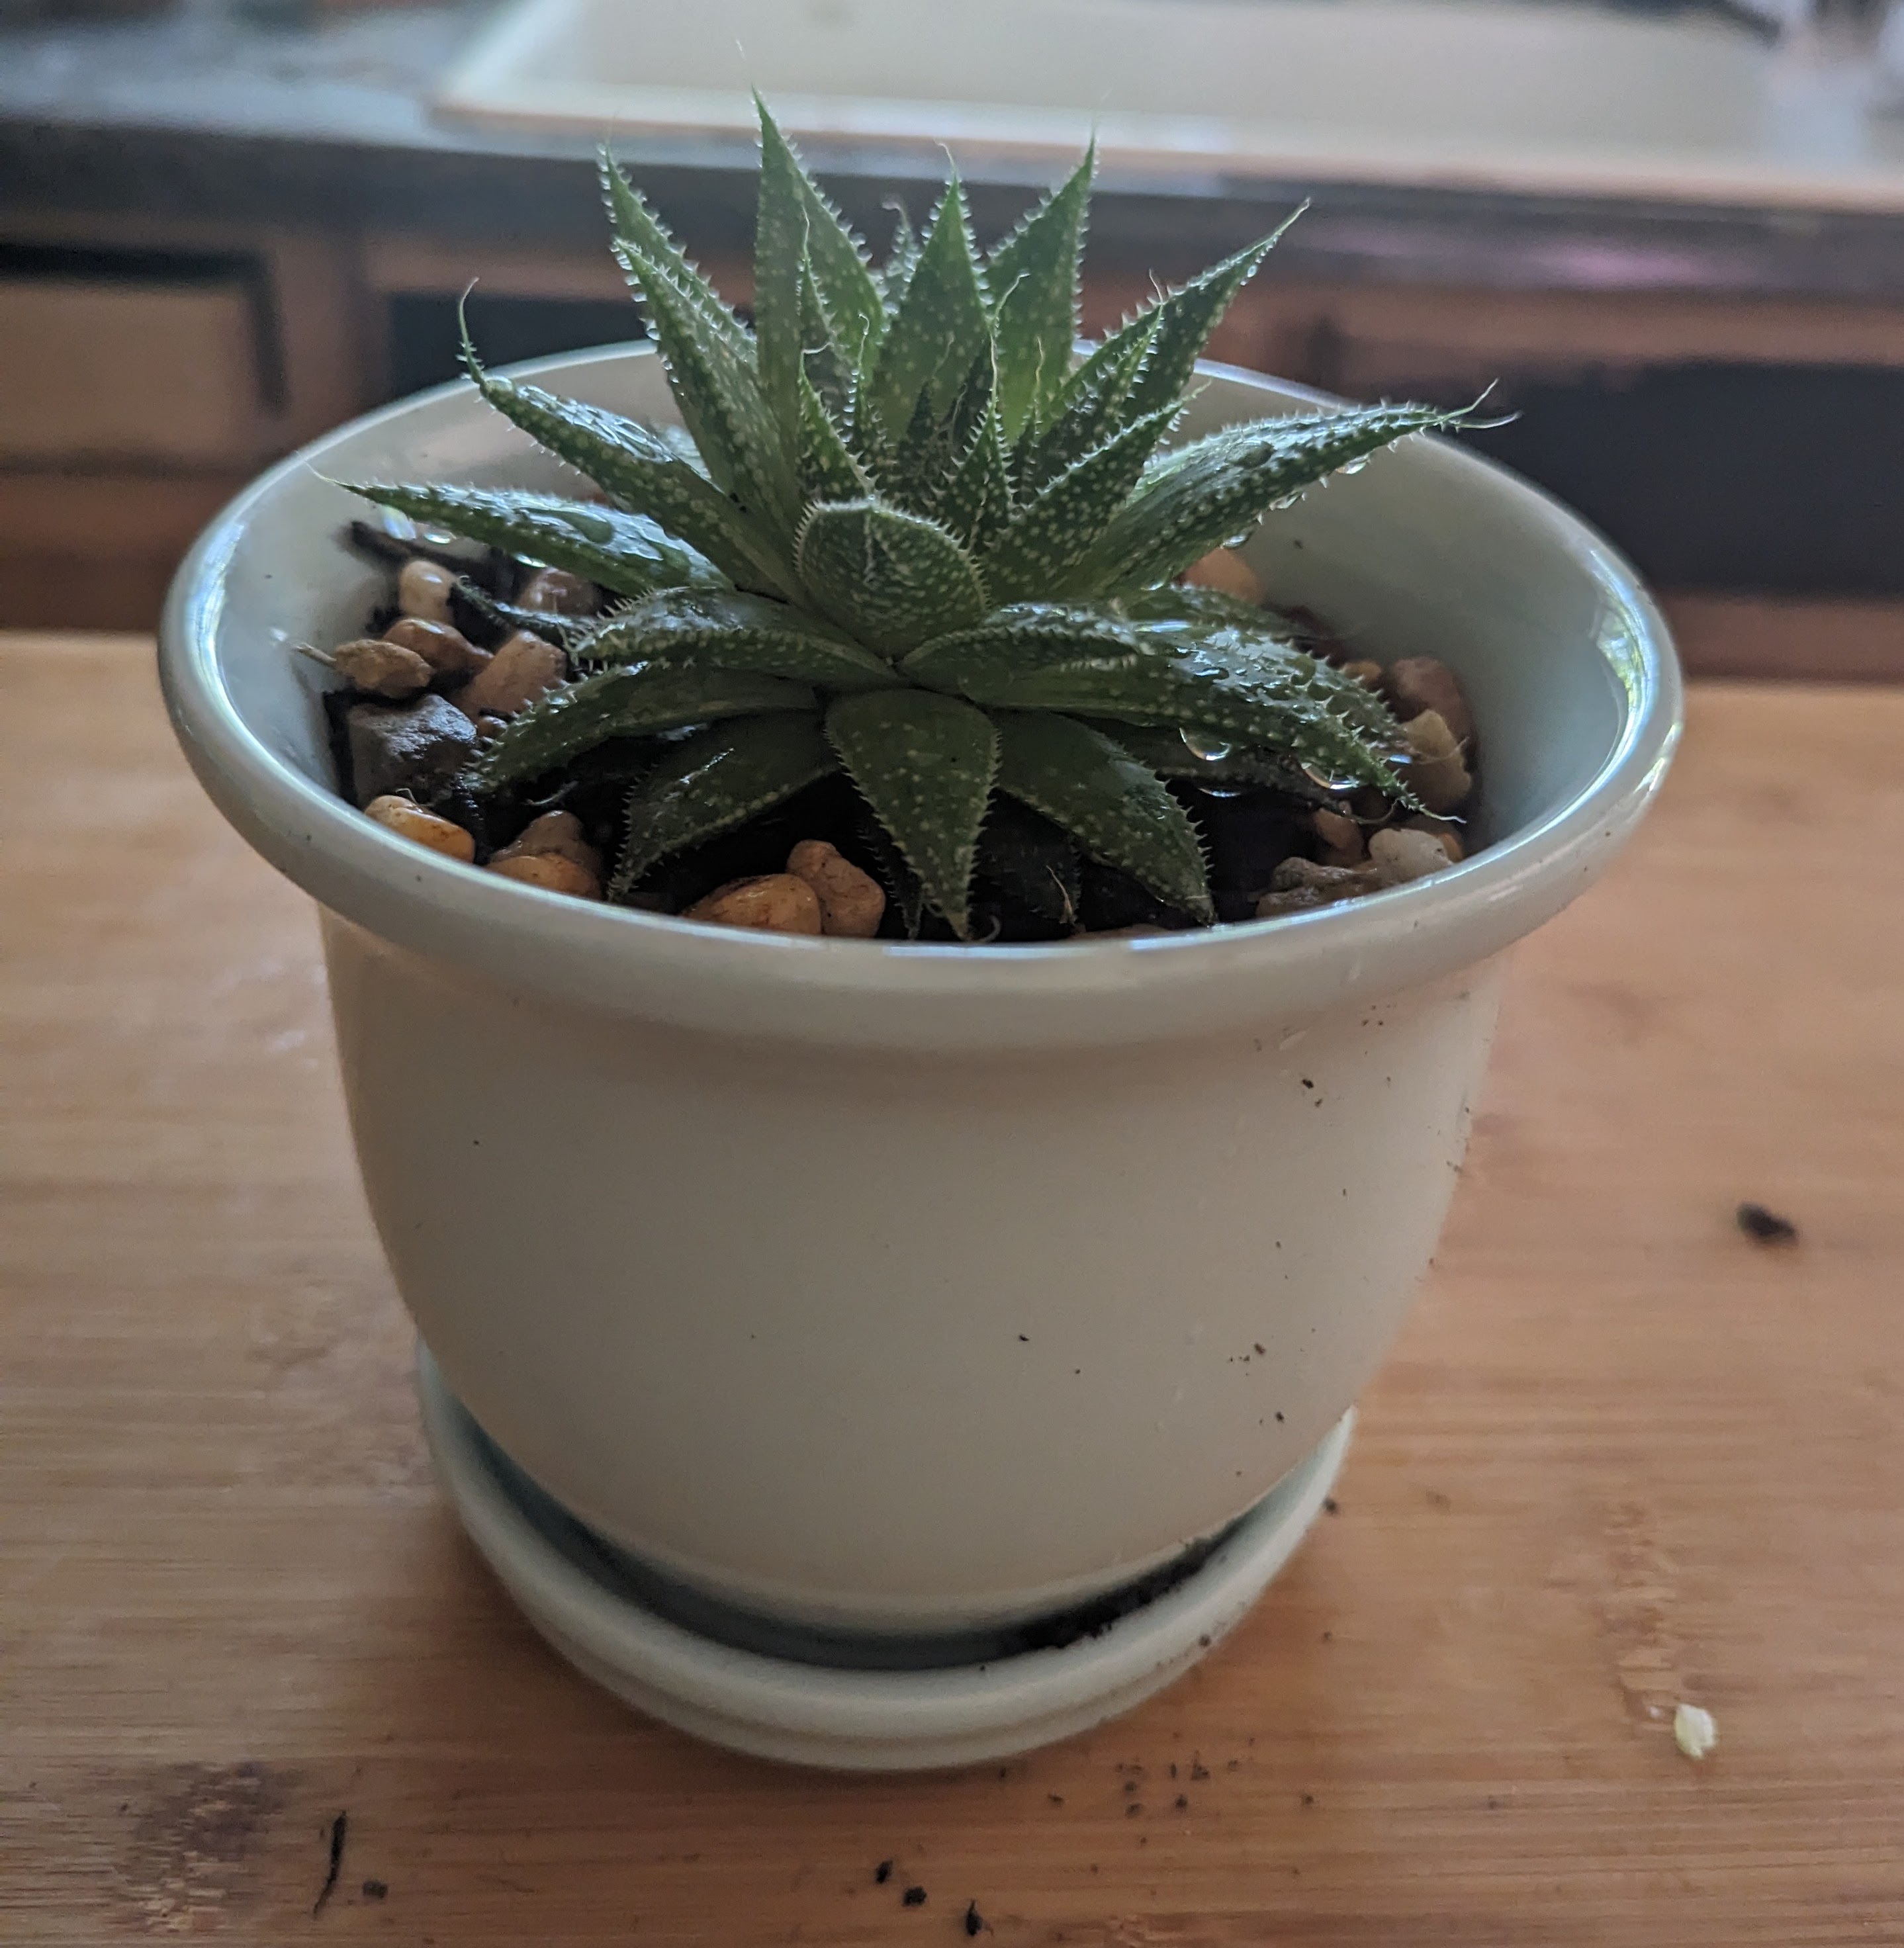 New Plant for me: Lace Aloe